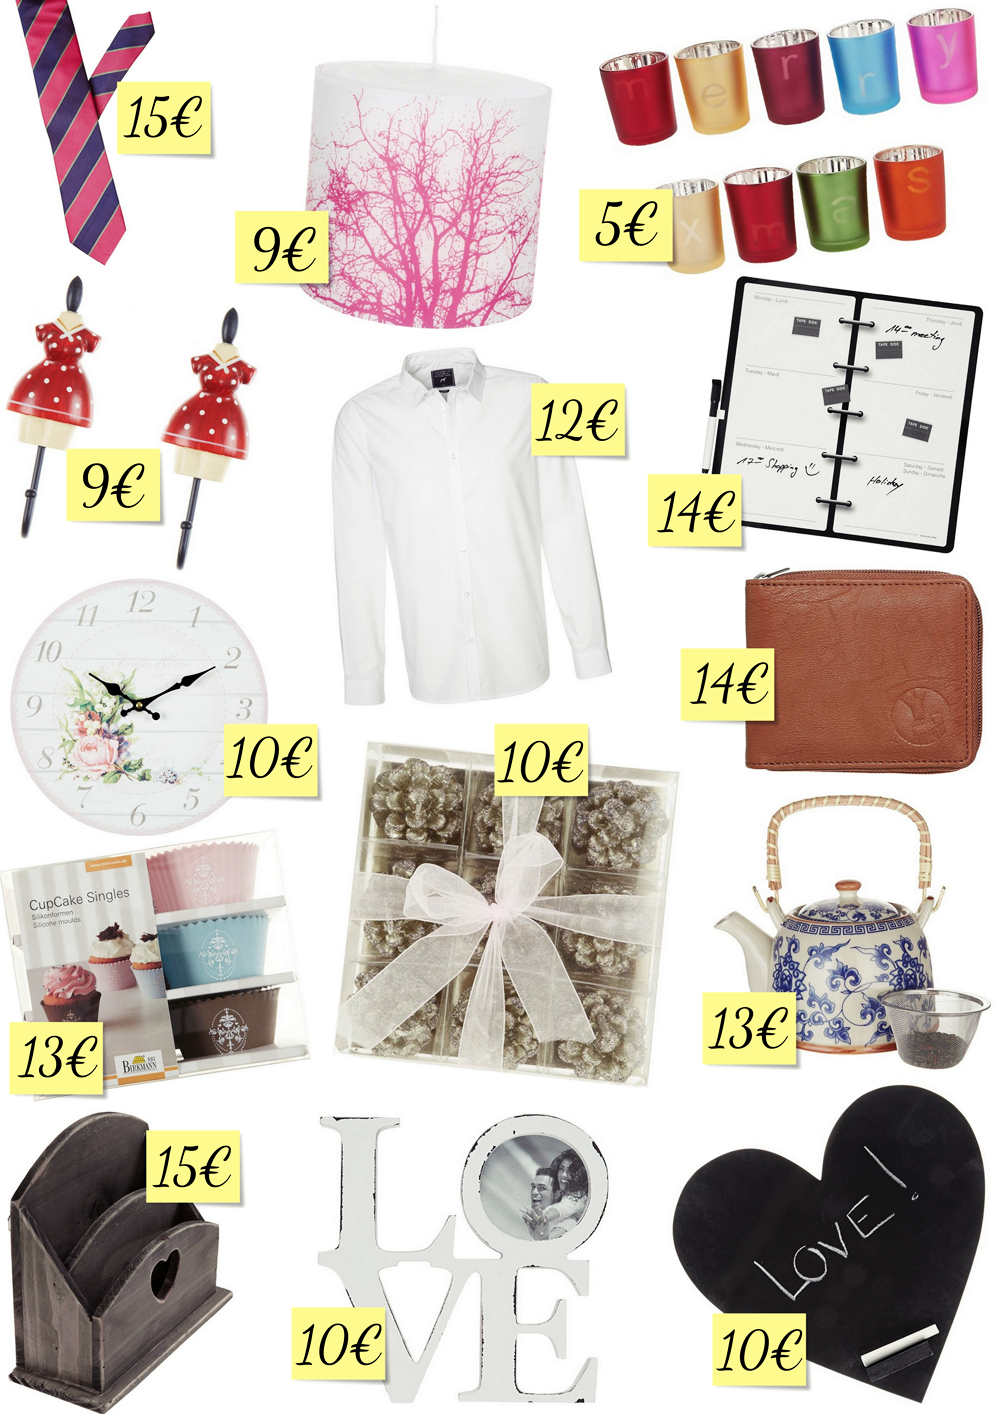 Idee Regalo Natale Zii.Christmas Time Idee Regalo Sotto I 15 The Style Fever